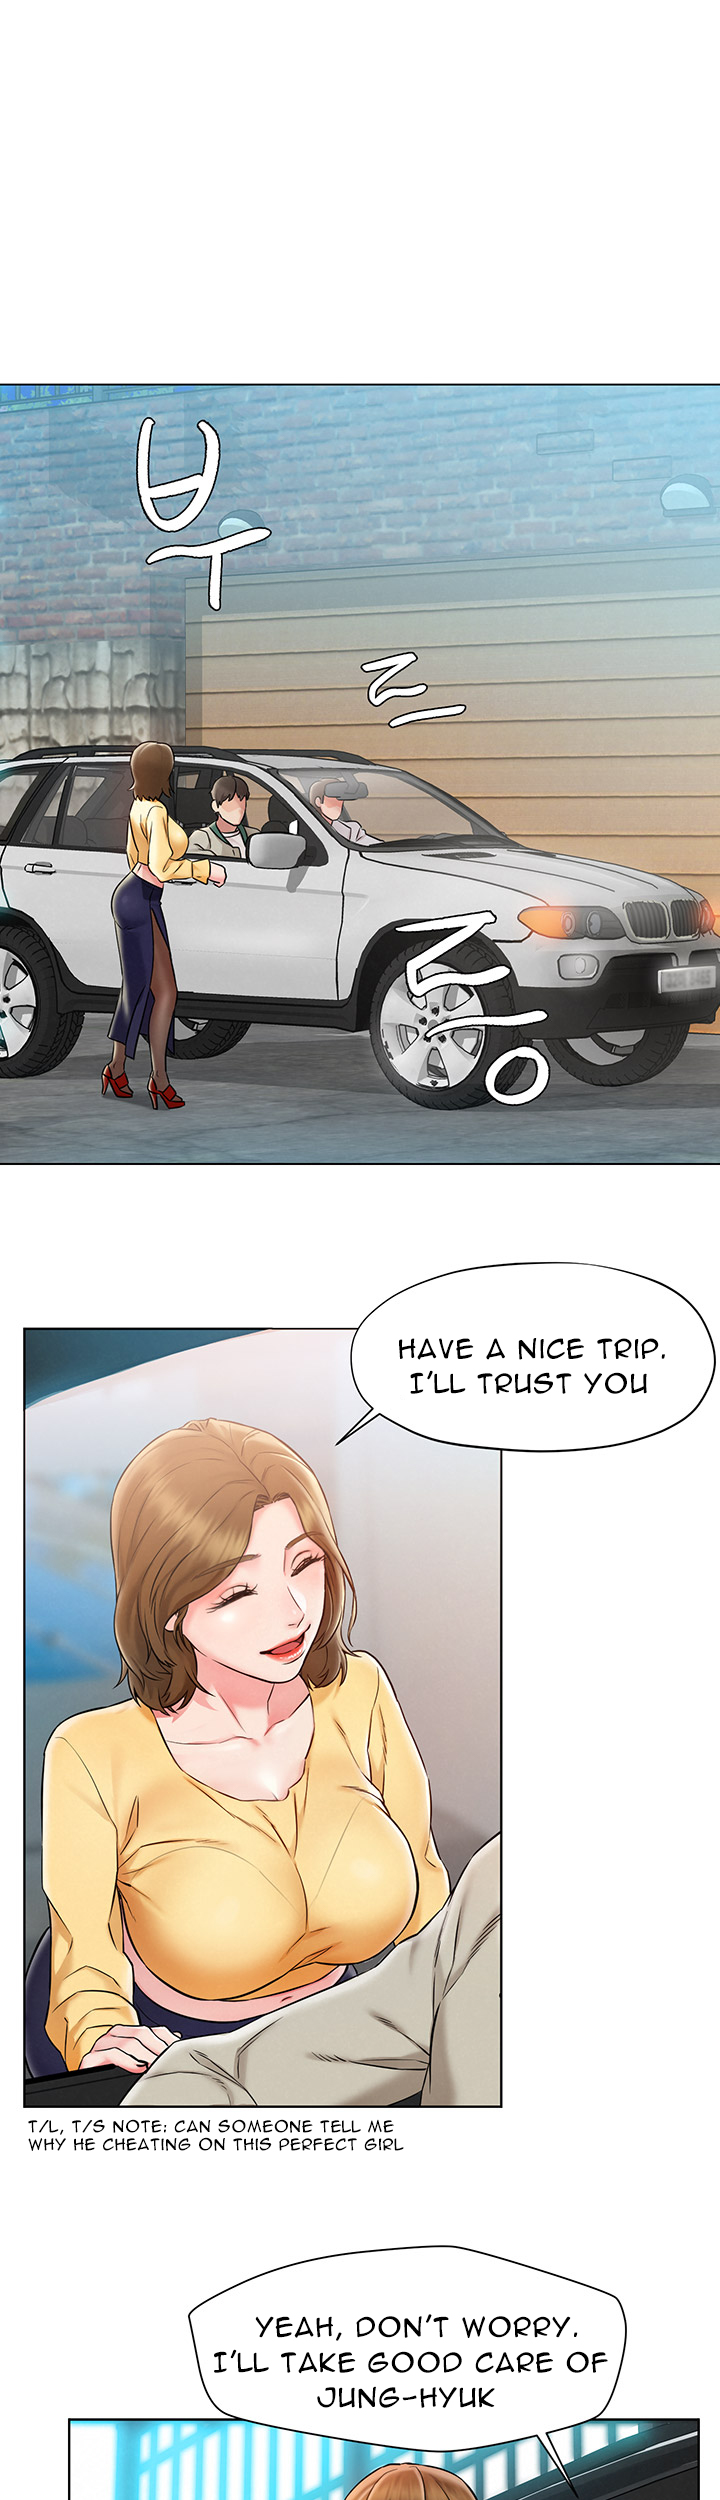 Affair Travel - Chapter 1 Page 16